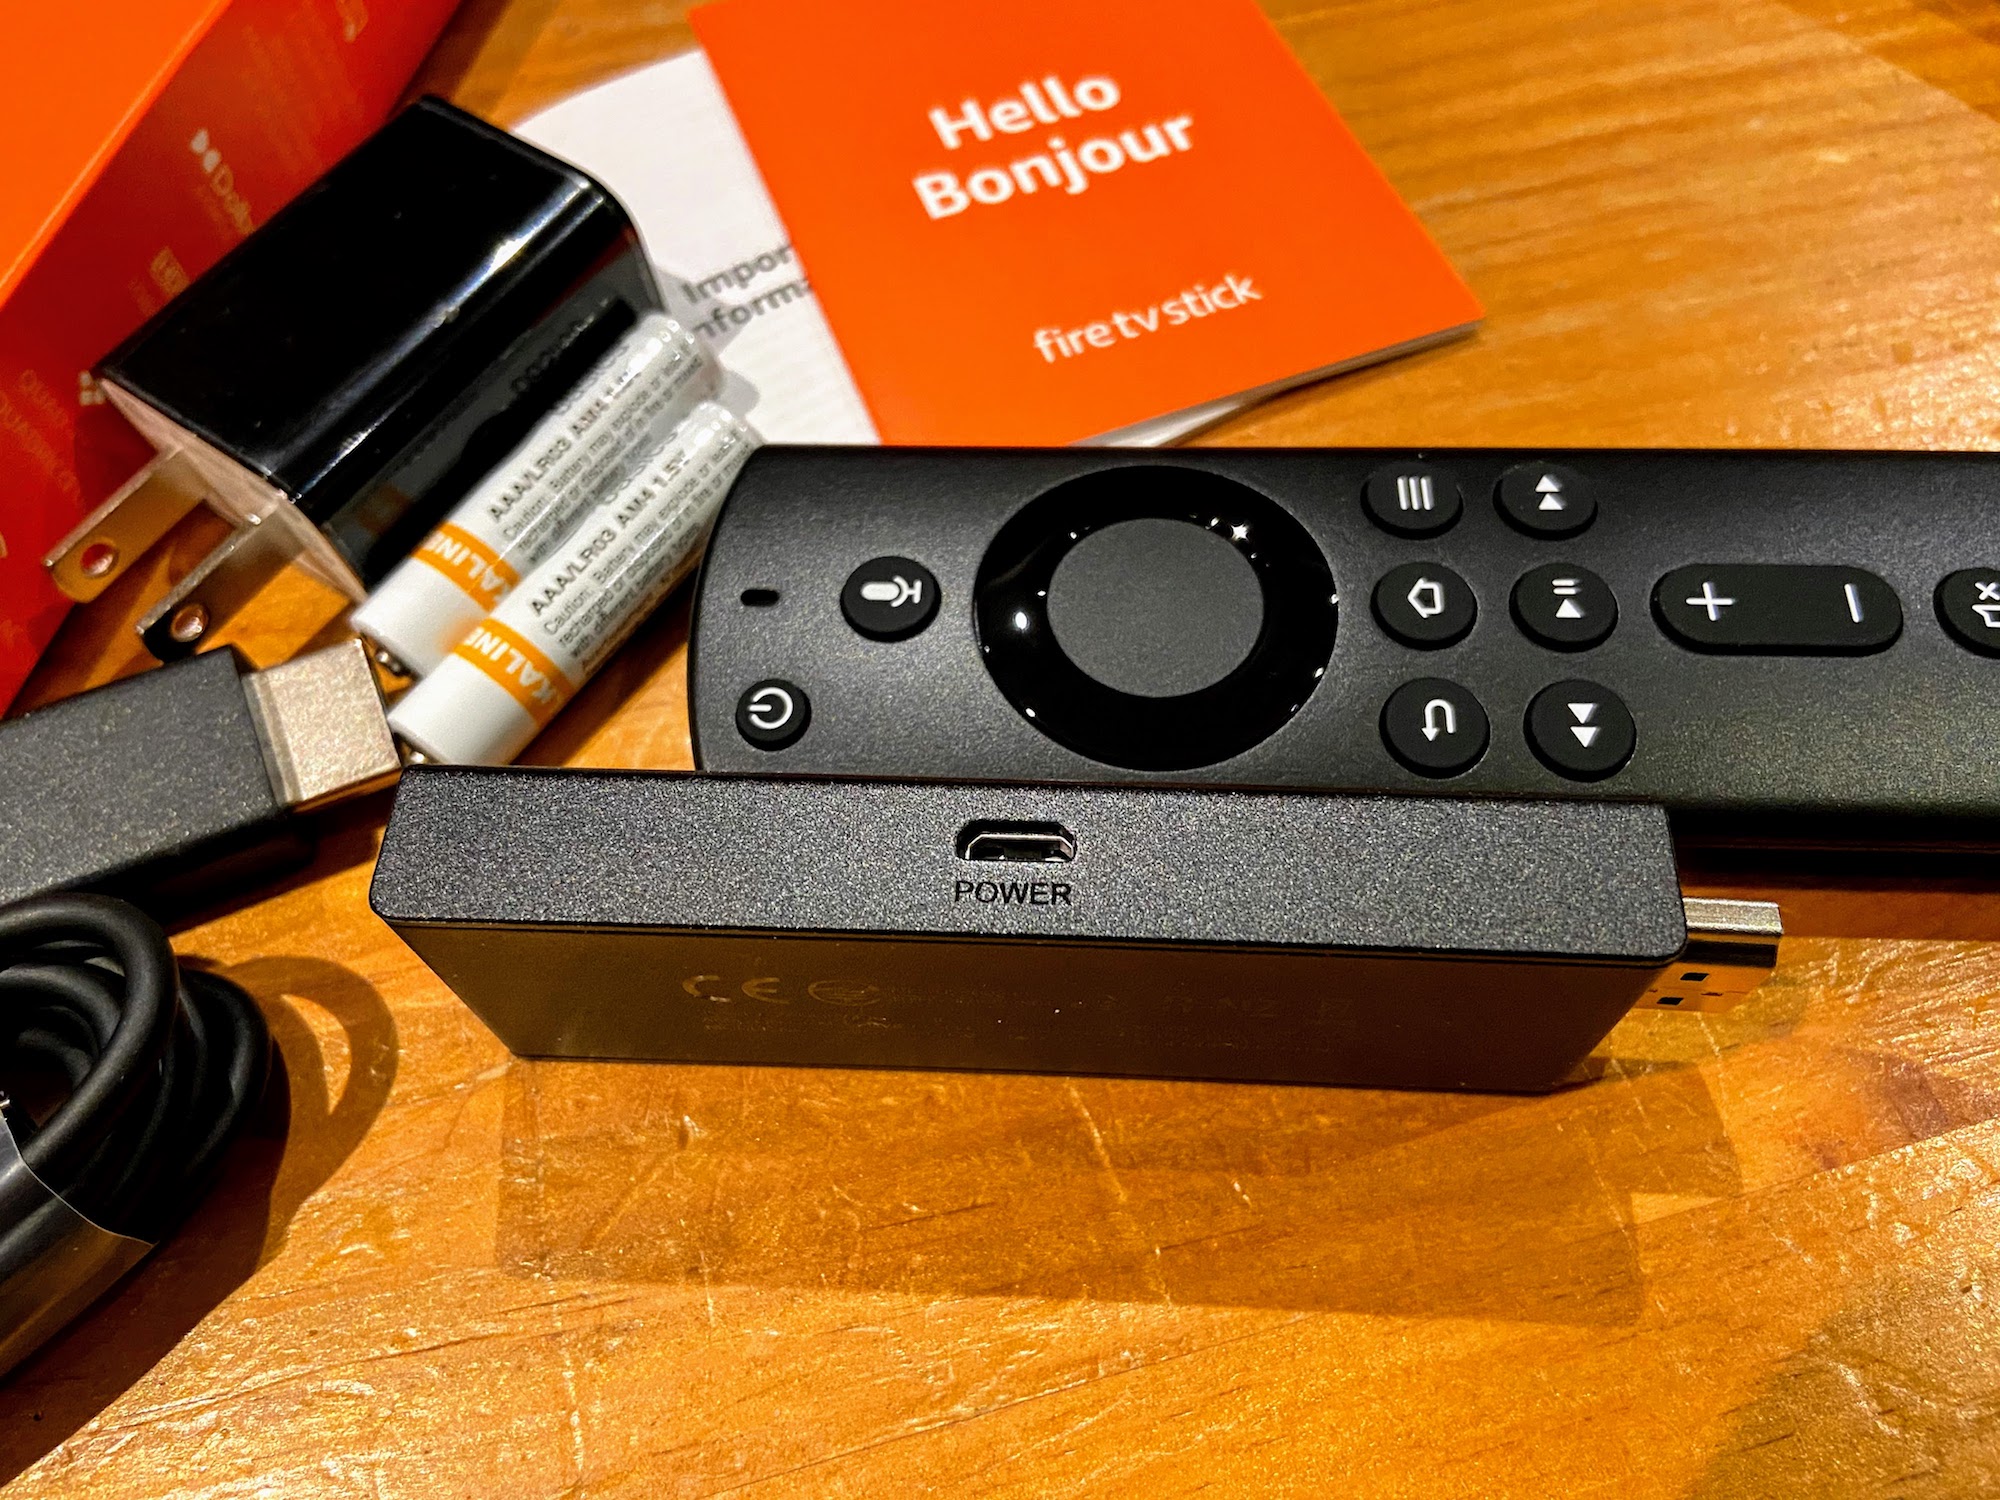 Fire TV Stick Lite is on sale for $14.99 for Prime Day, but you  should spend the extra $2 and get the Fire TV Stick instead